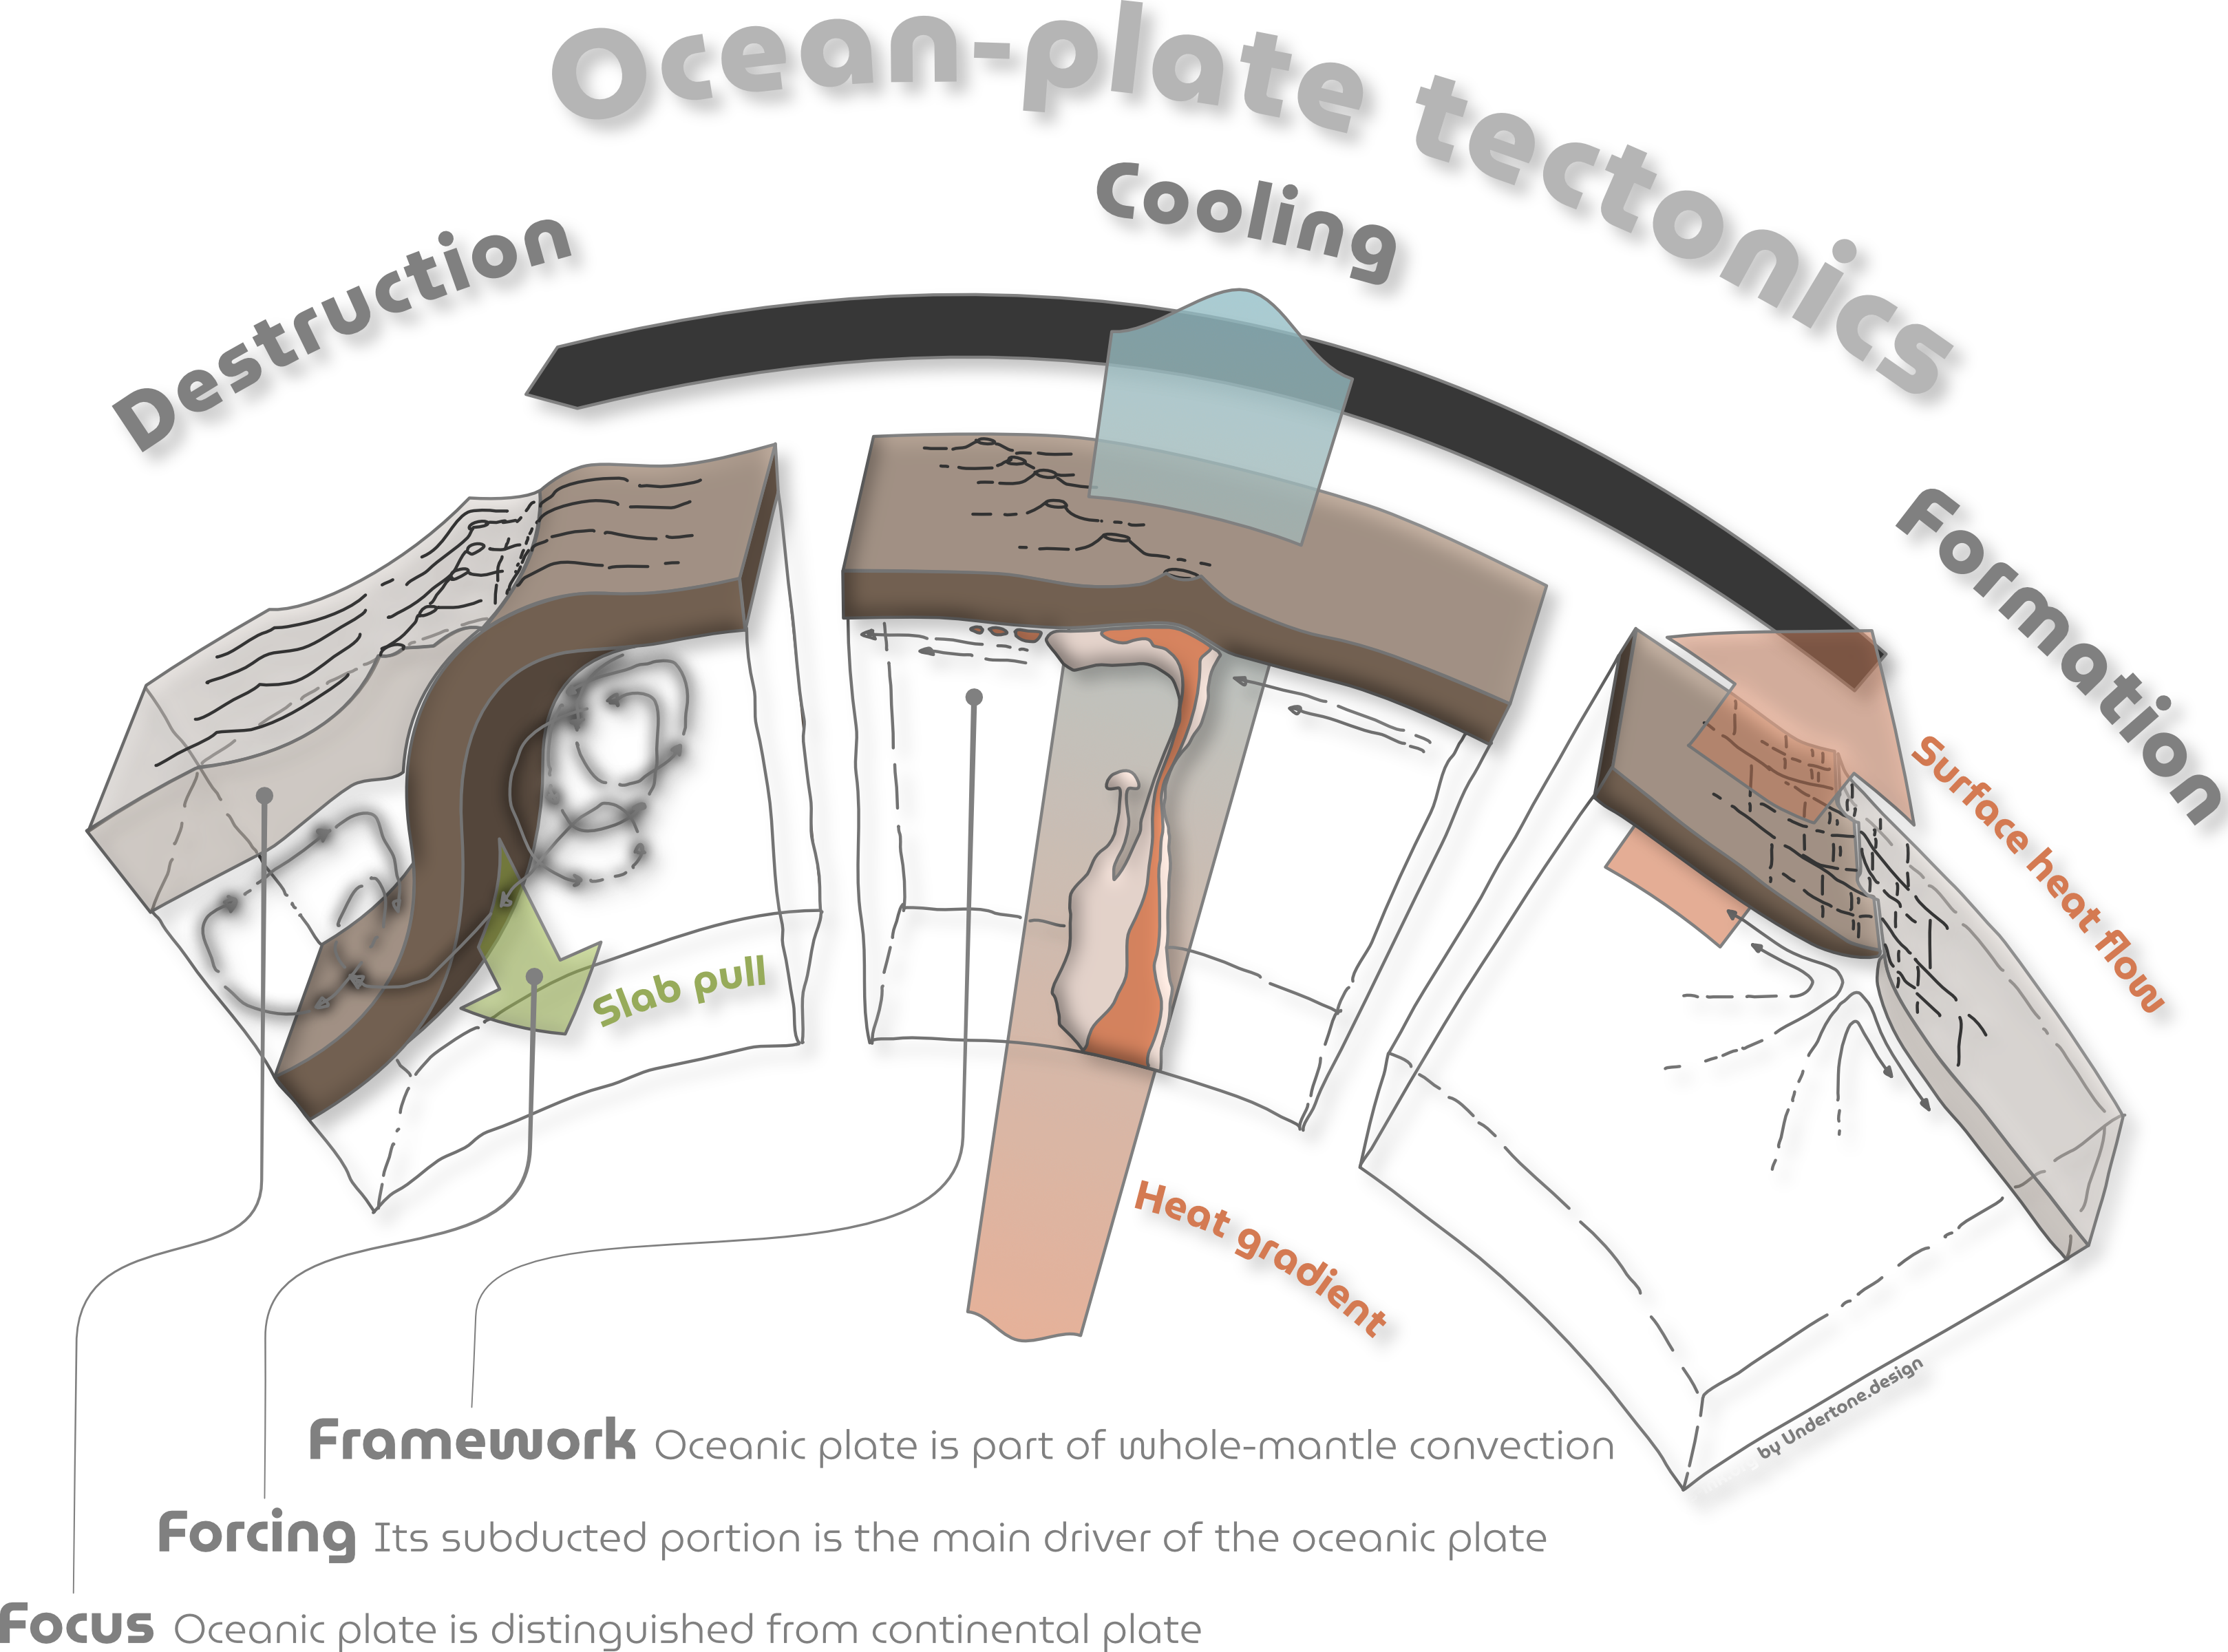 A schematic highlighting Ocean-plate tectonics: ocean-plate formation, cooling and destruction as part of the planet's global mantle convection.